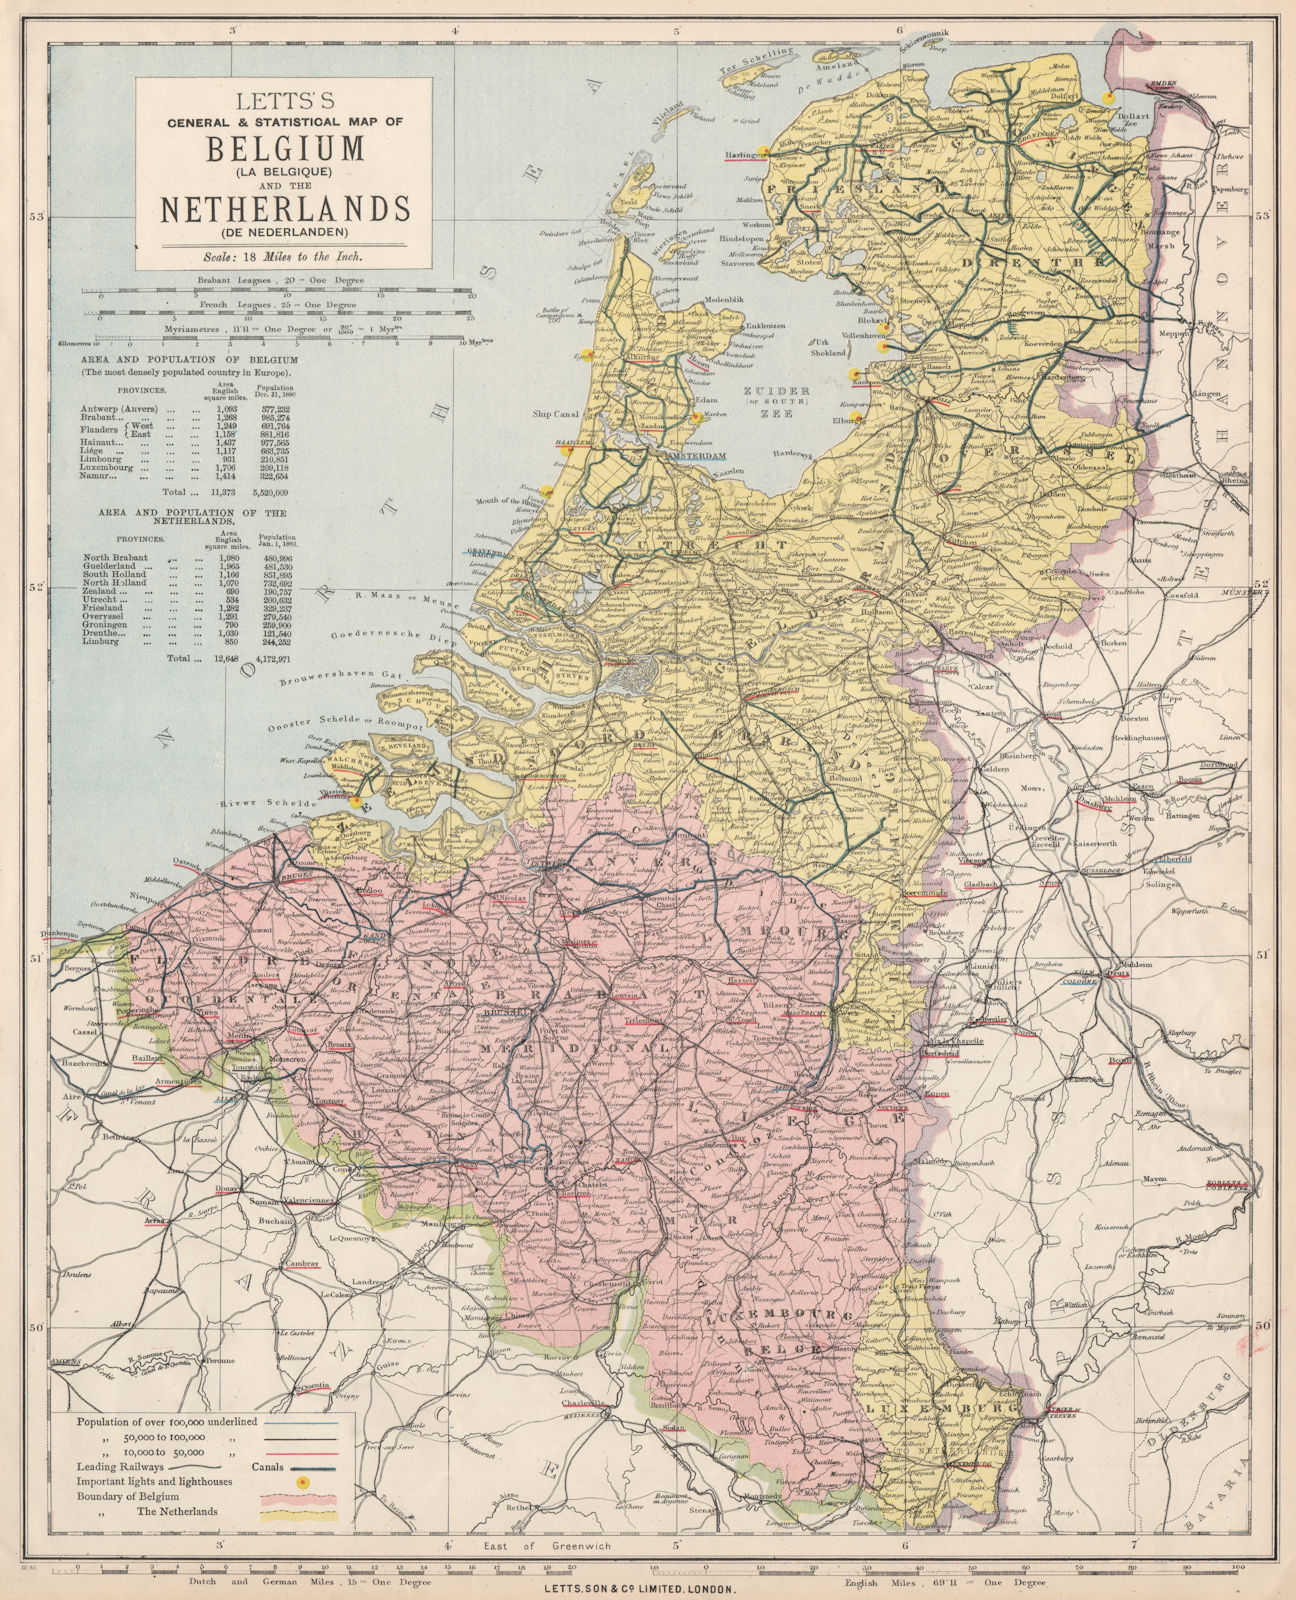 BENELUX. Netherland Belgium & Luxembourg. Lighthouses canals. LETTS 1889 map